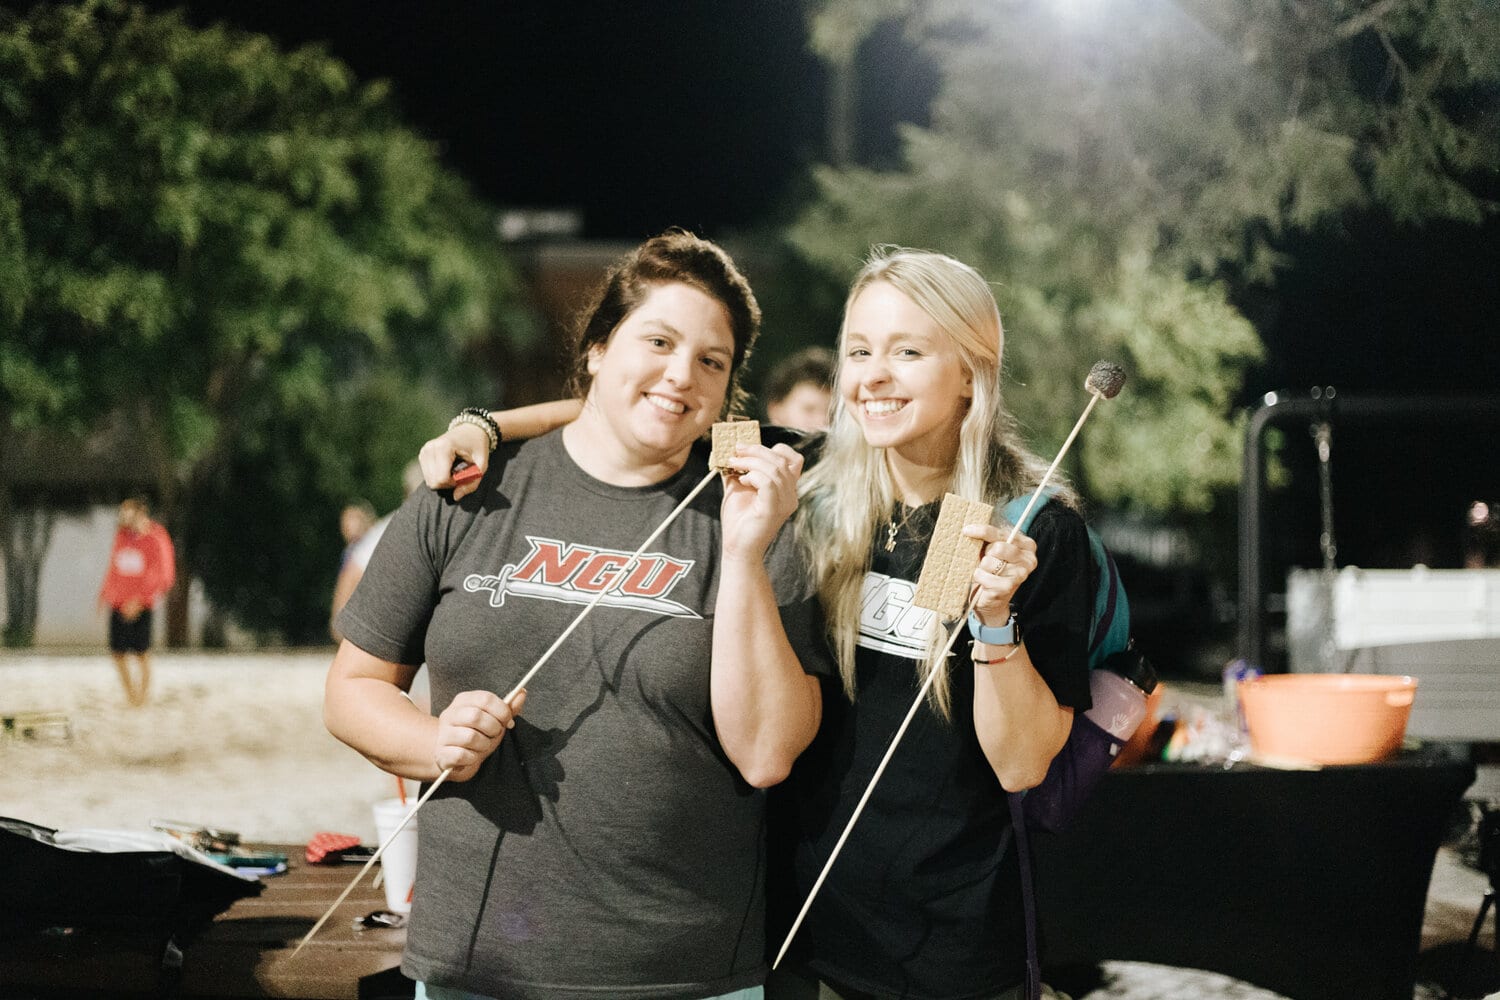 Homecoming also includes a lot of fellowship with friends and s’mores! Here, residents Christen Mahaffey and Mary Margaret Ellison are enjoying some s’mores.